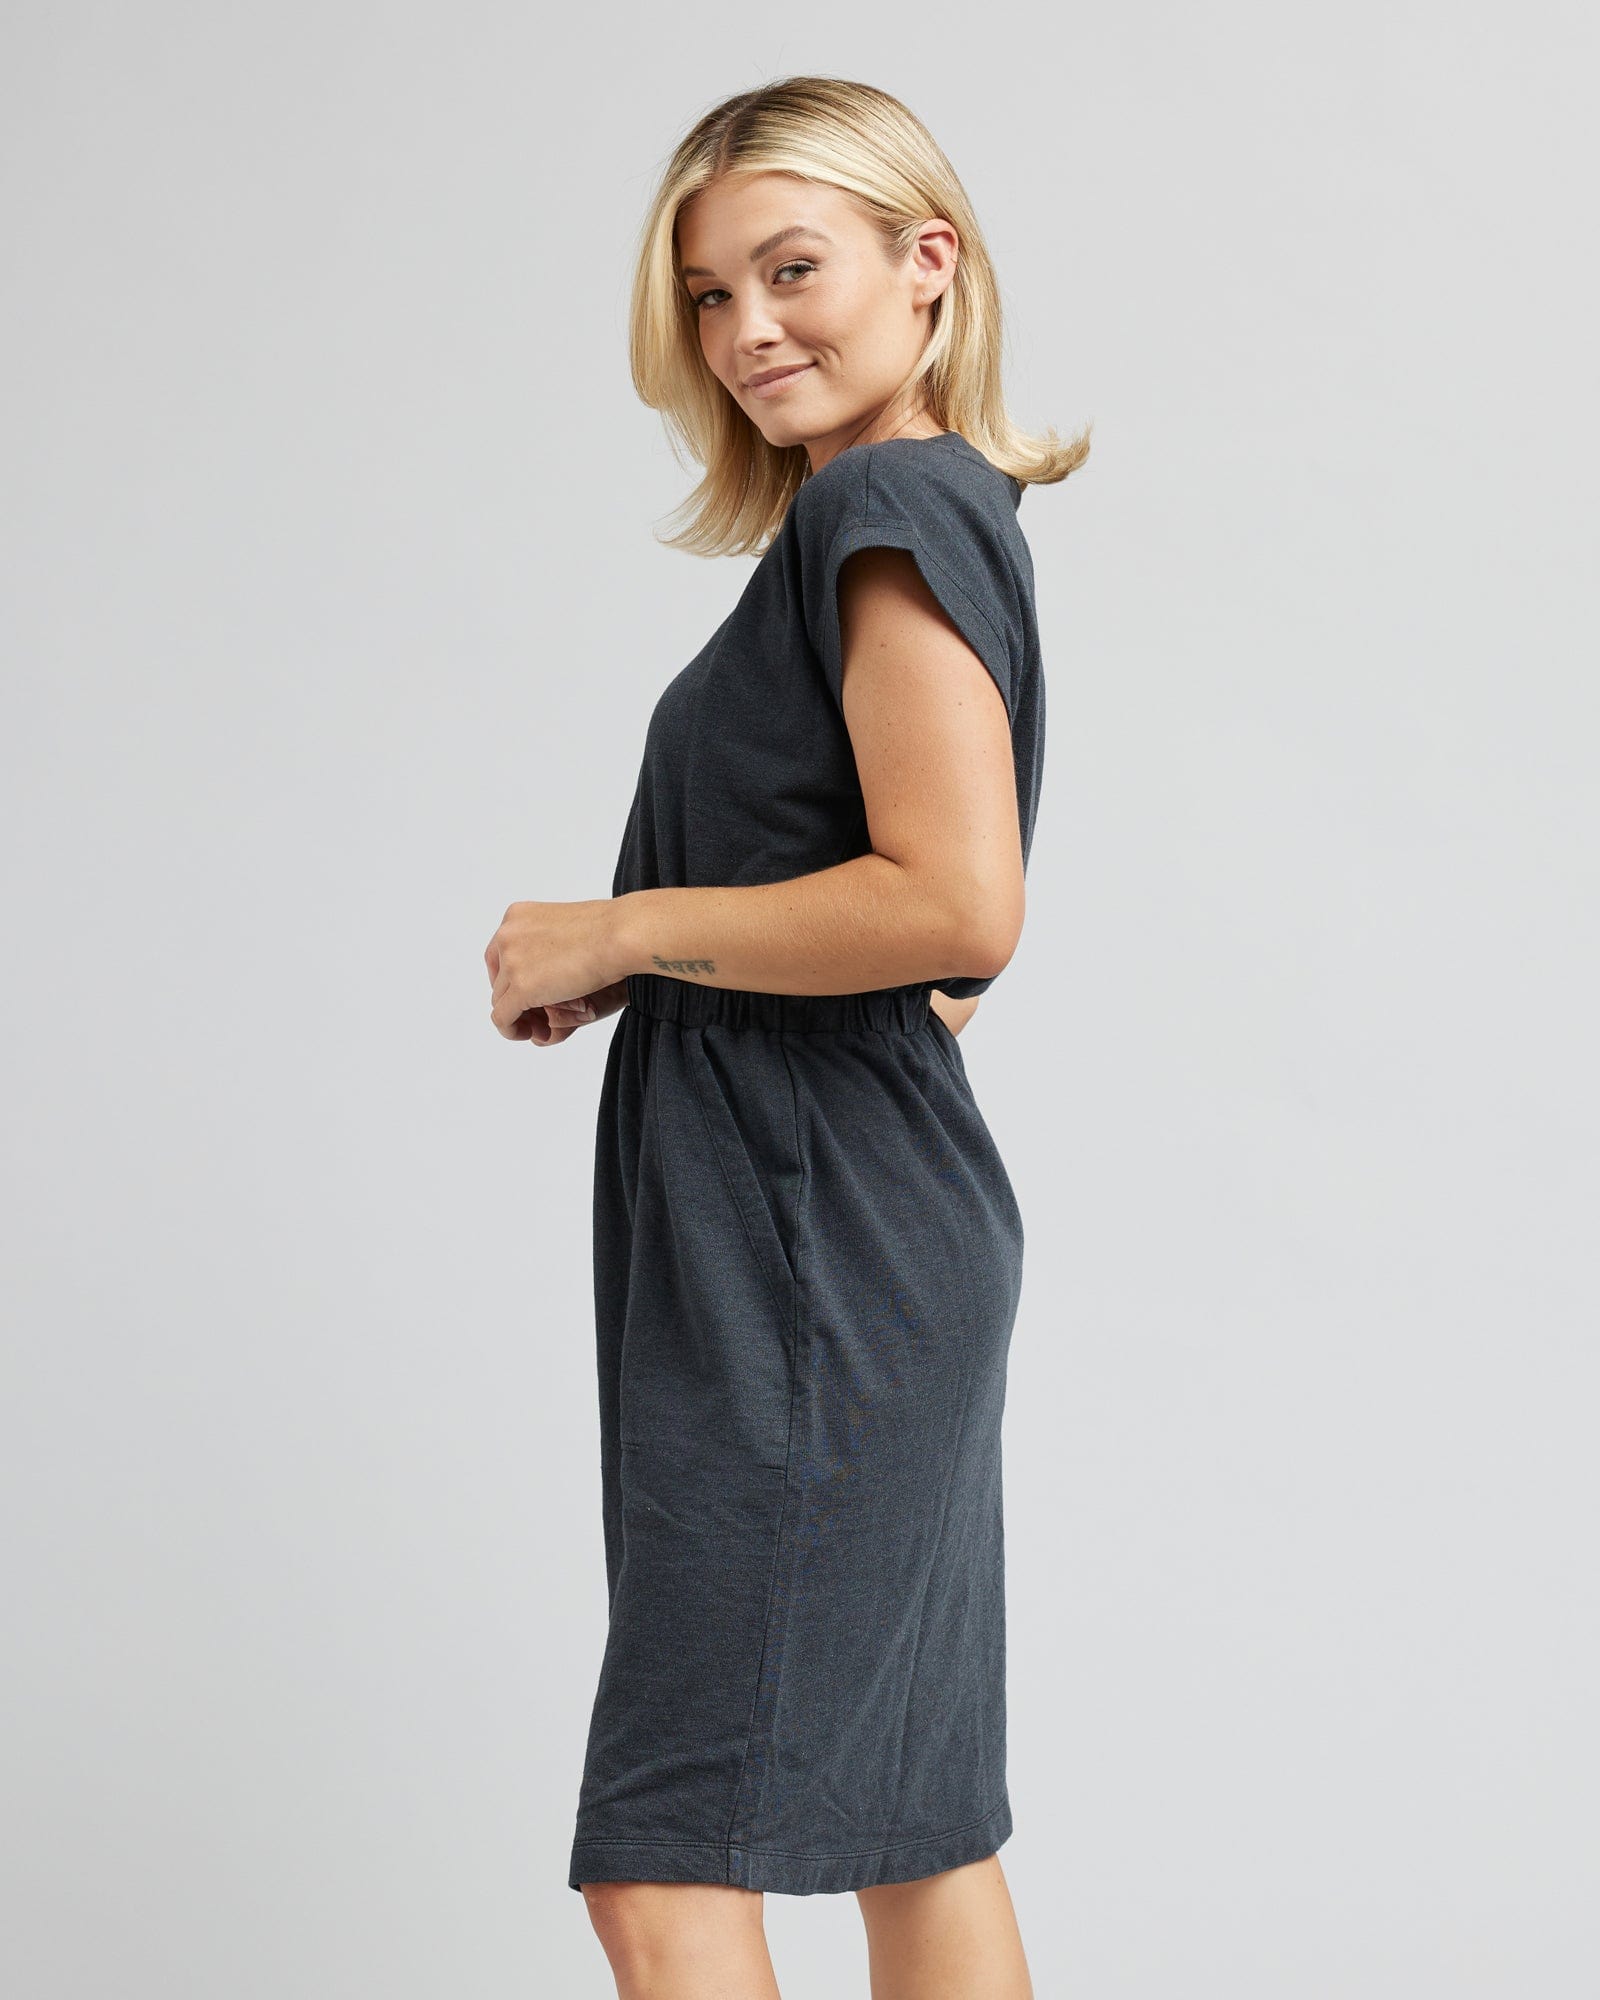 Woman in a short sleeve, v-neck, gray dress